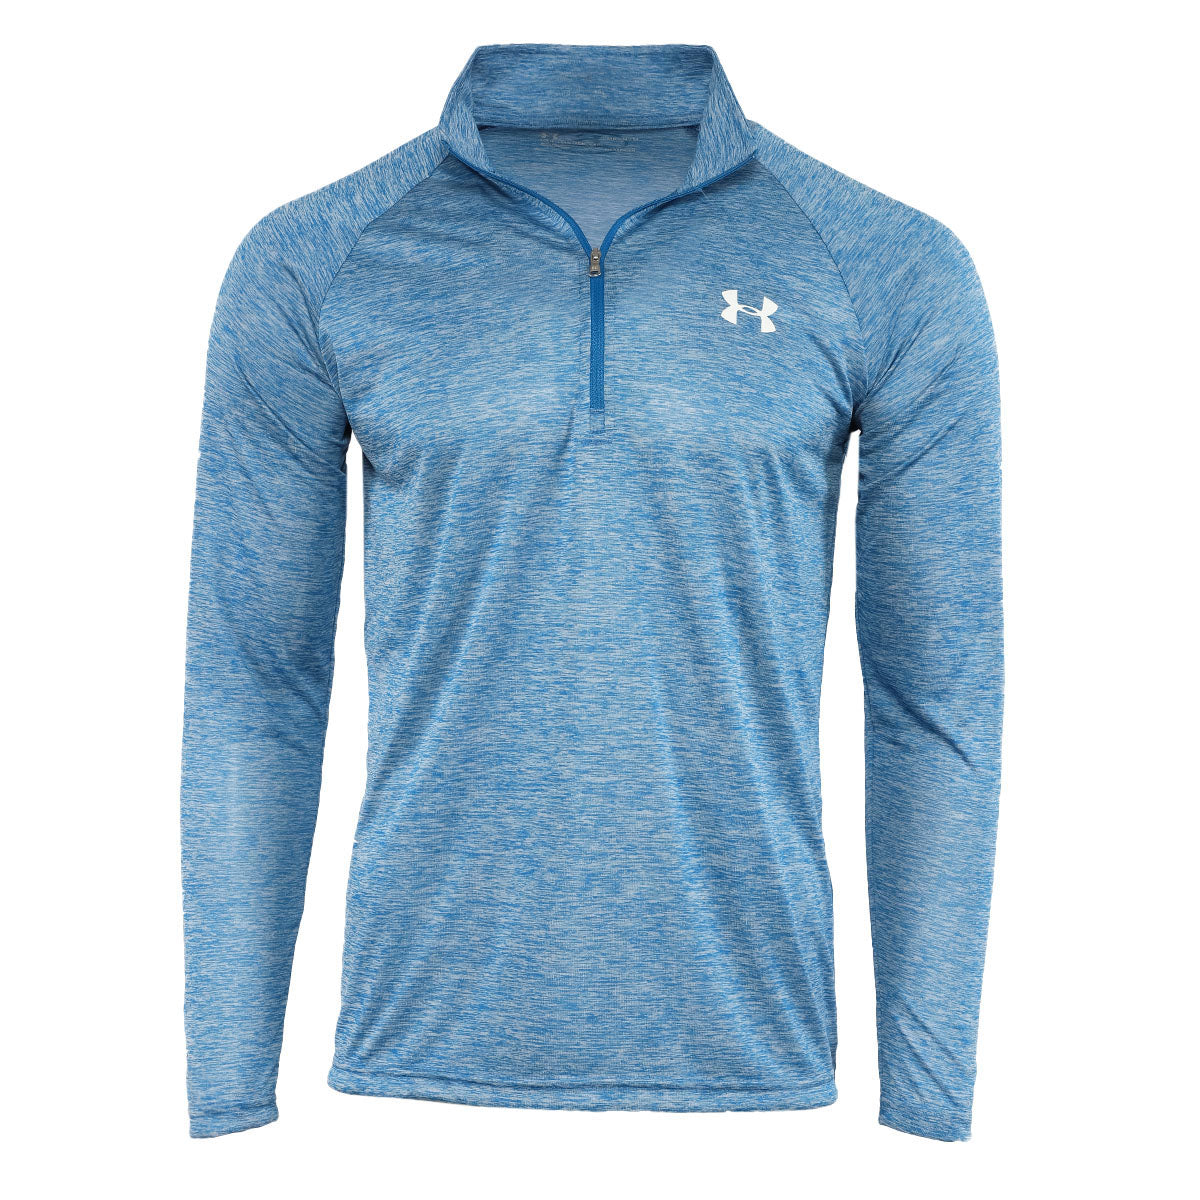 Image of Under Armour Men's UA Tech Space Dye 1/2 Zip Pullover